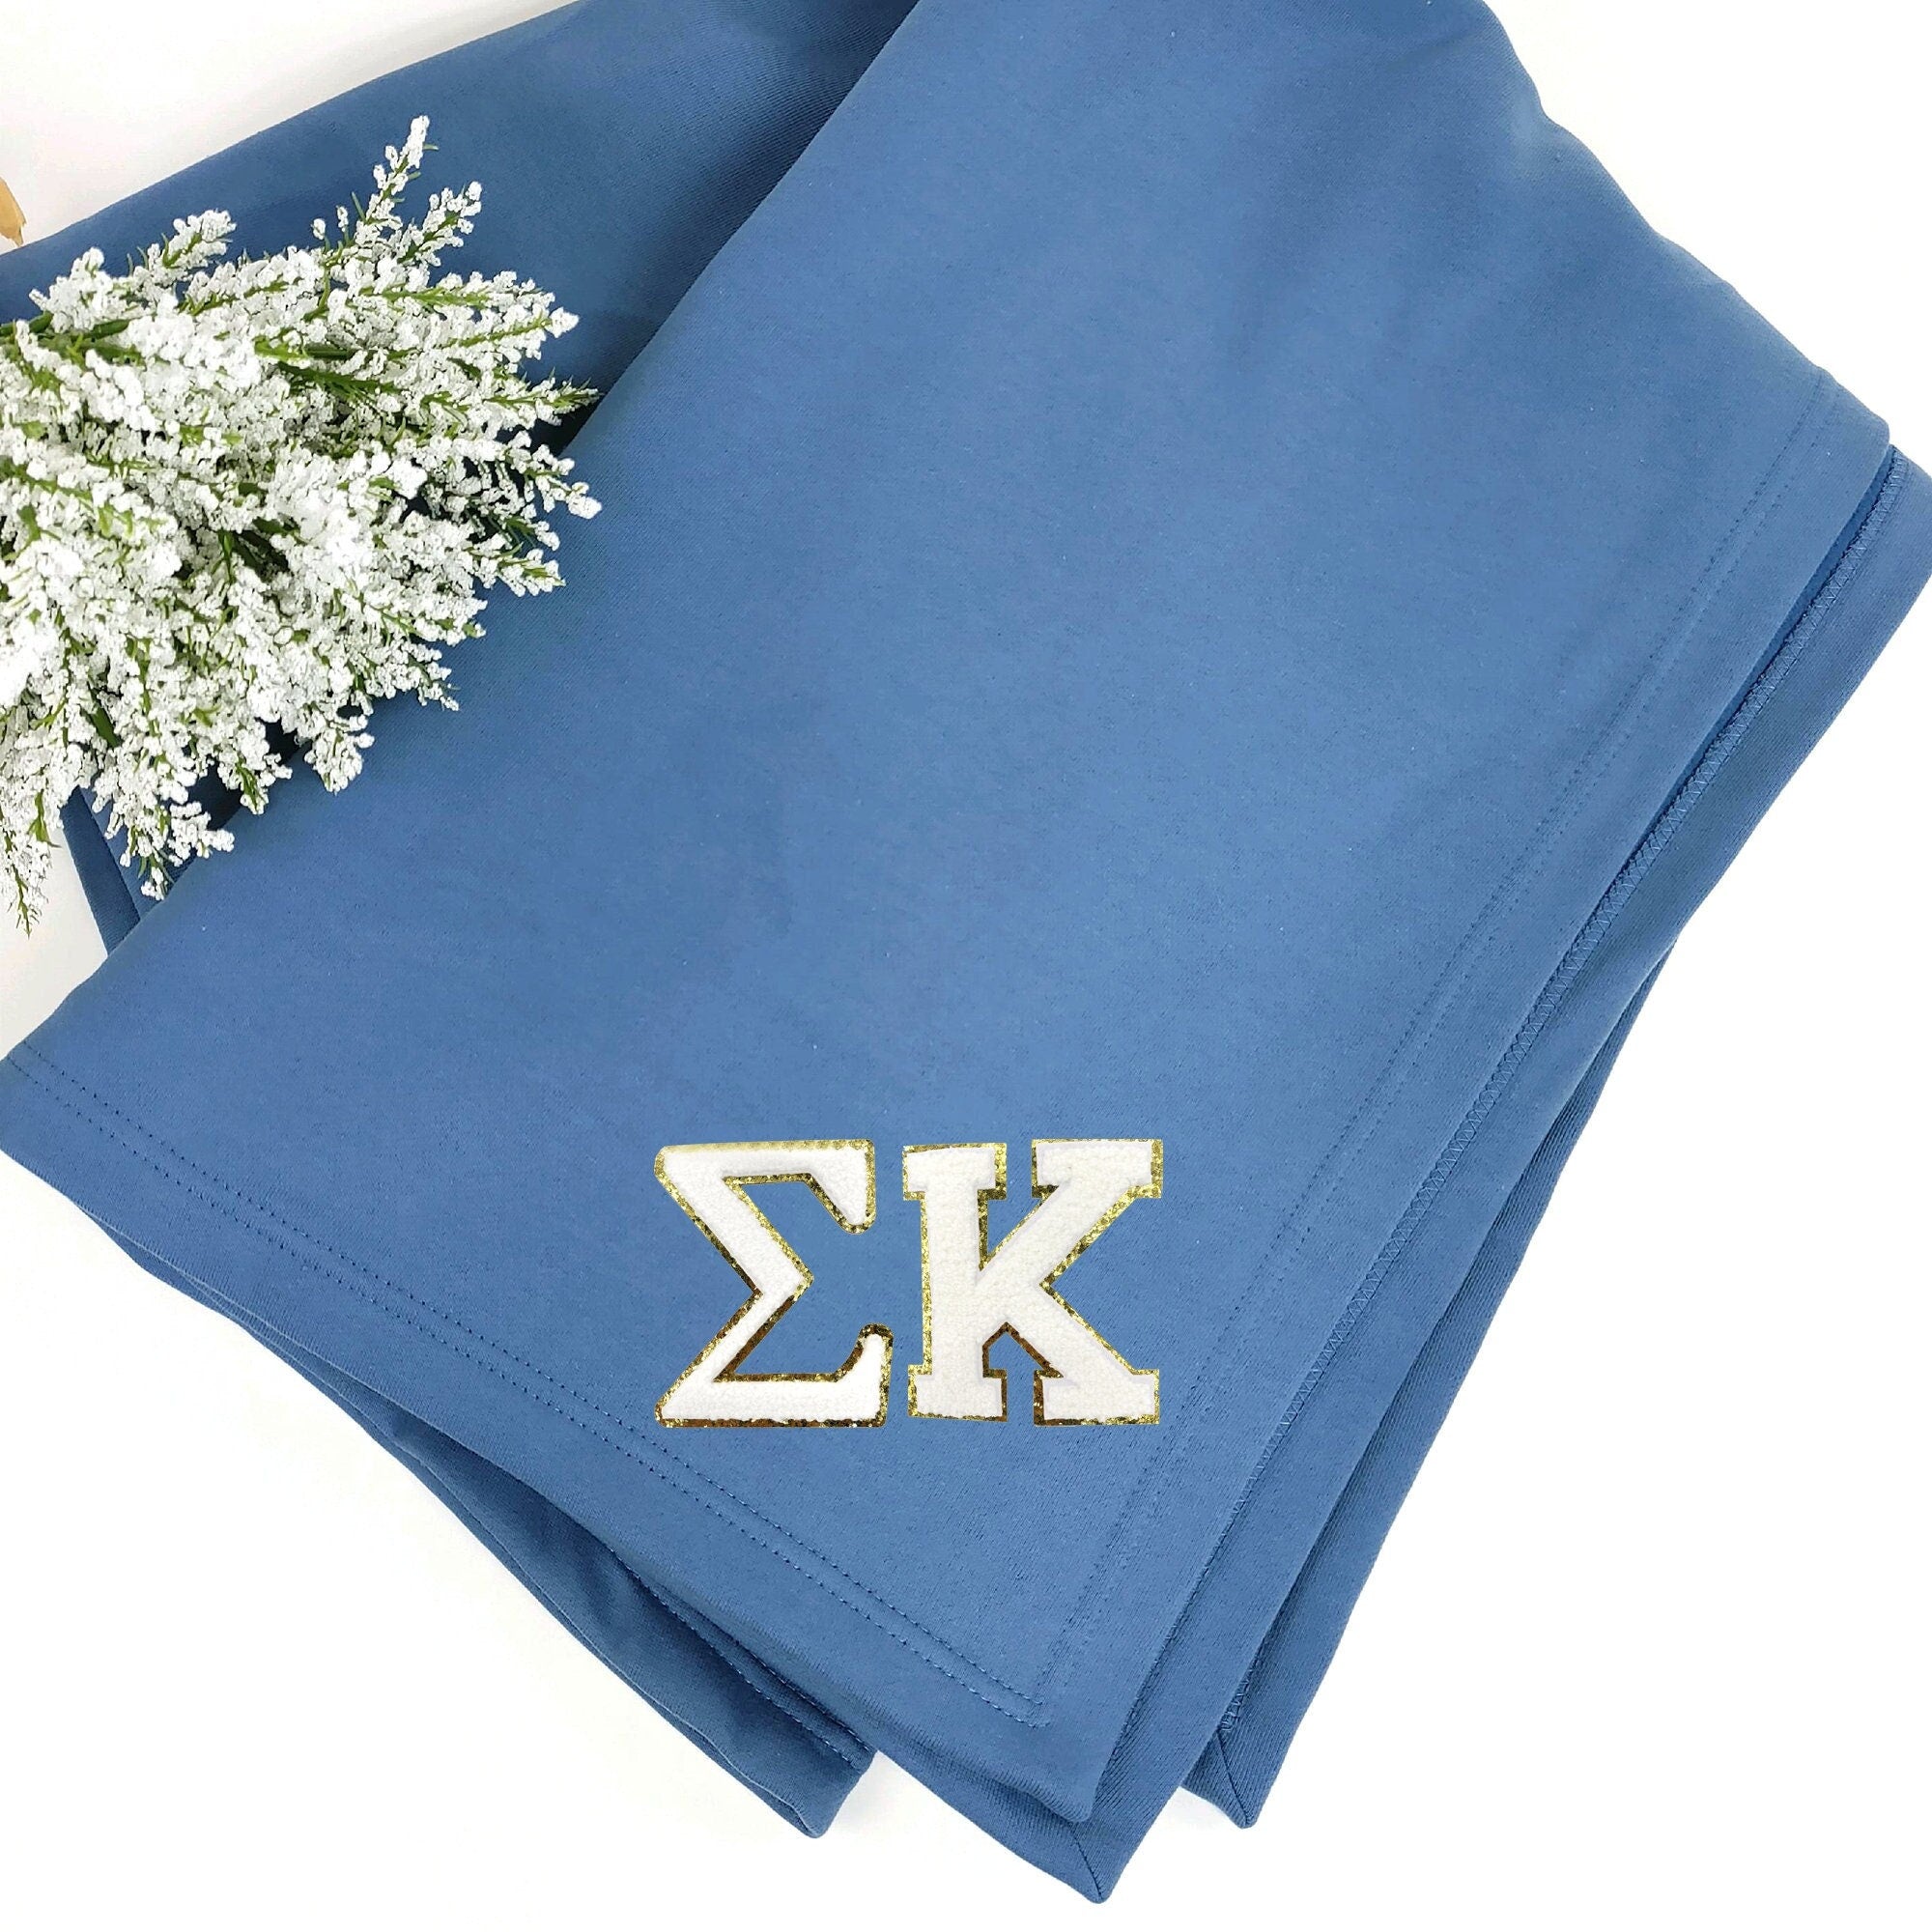 Sigma Kappa Sorority Patch Sweatshirt Blanket, Chenille Patch, Warm and Soft Material